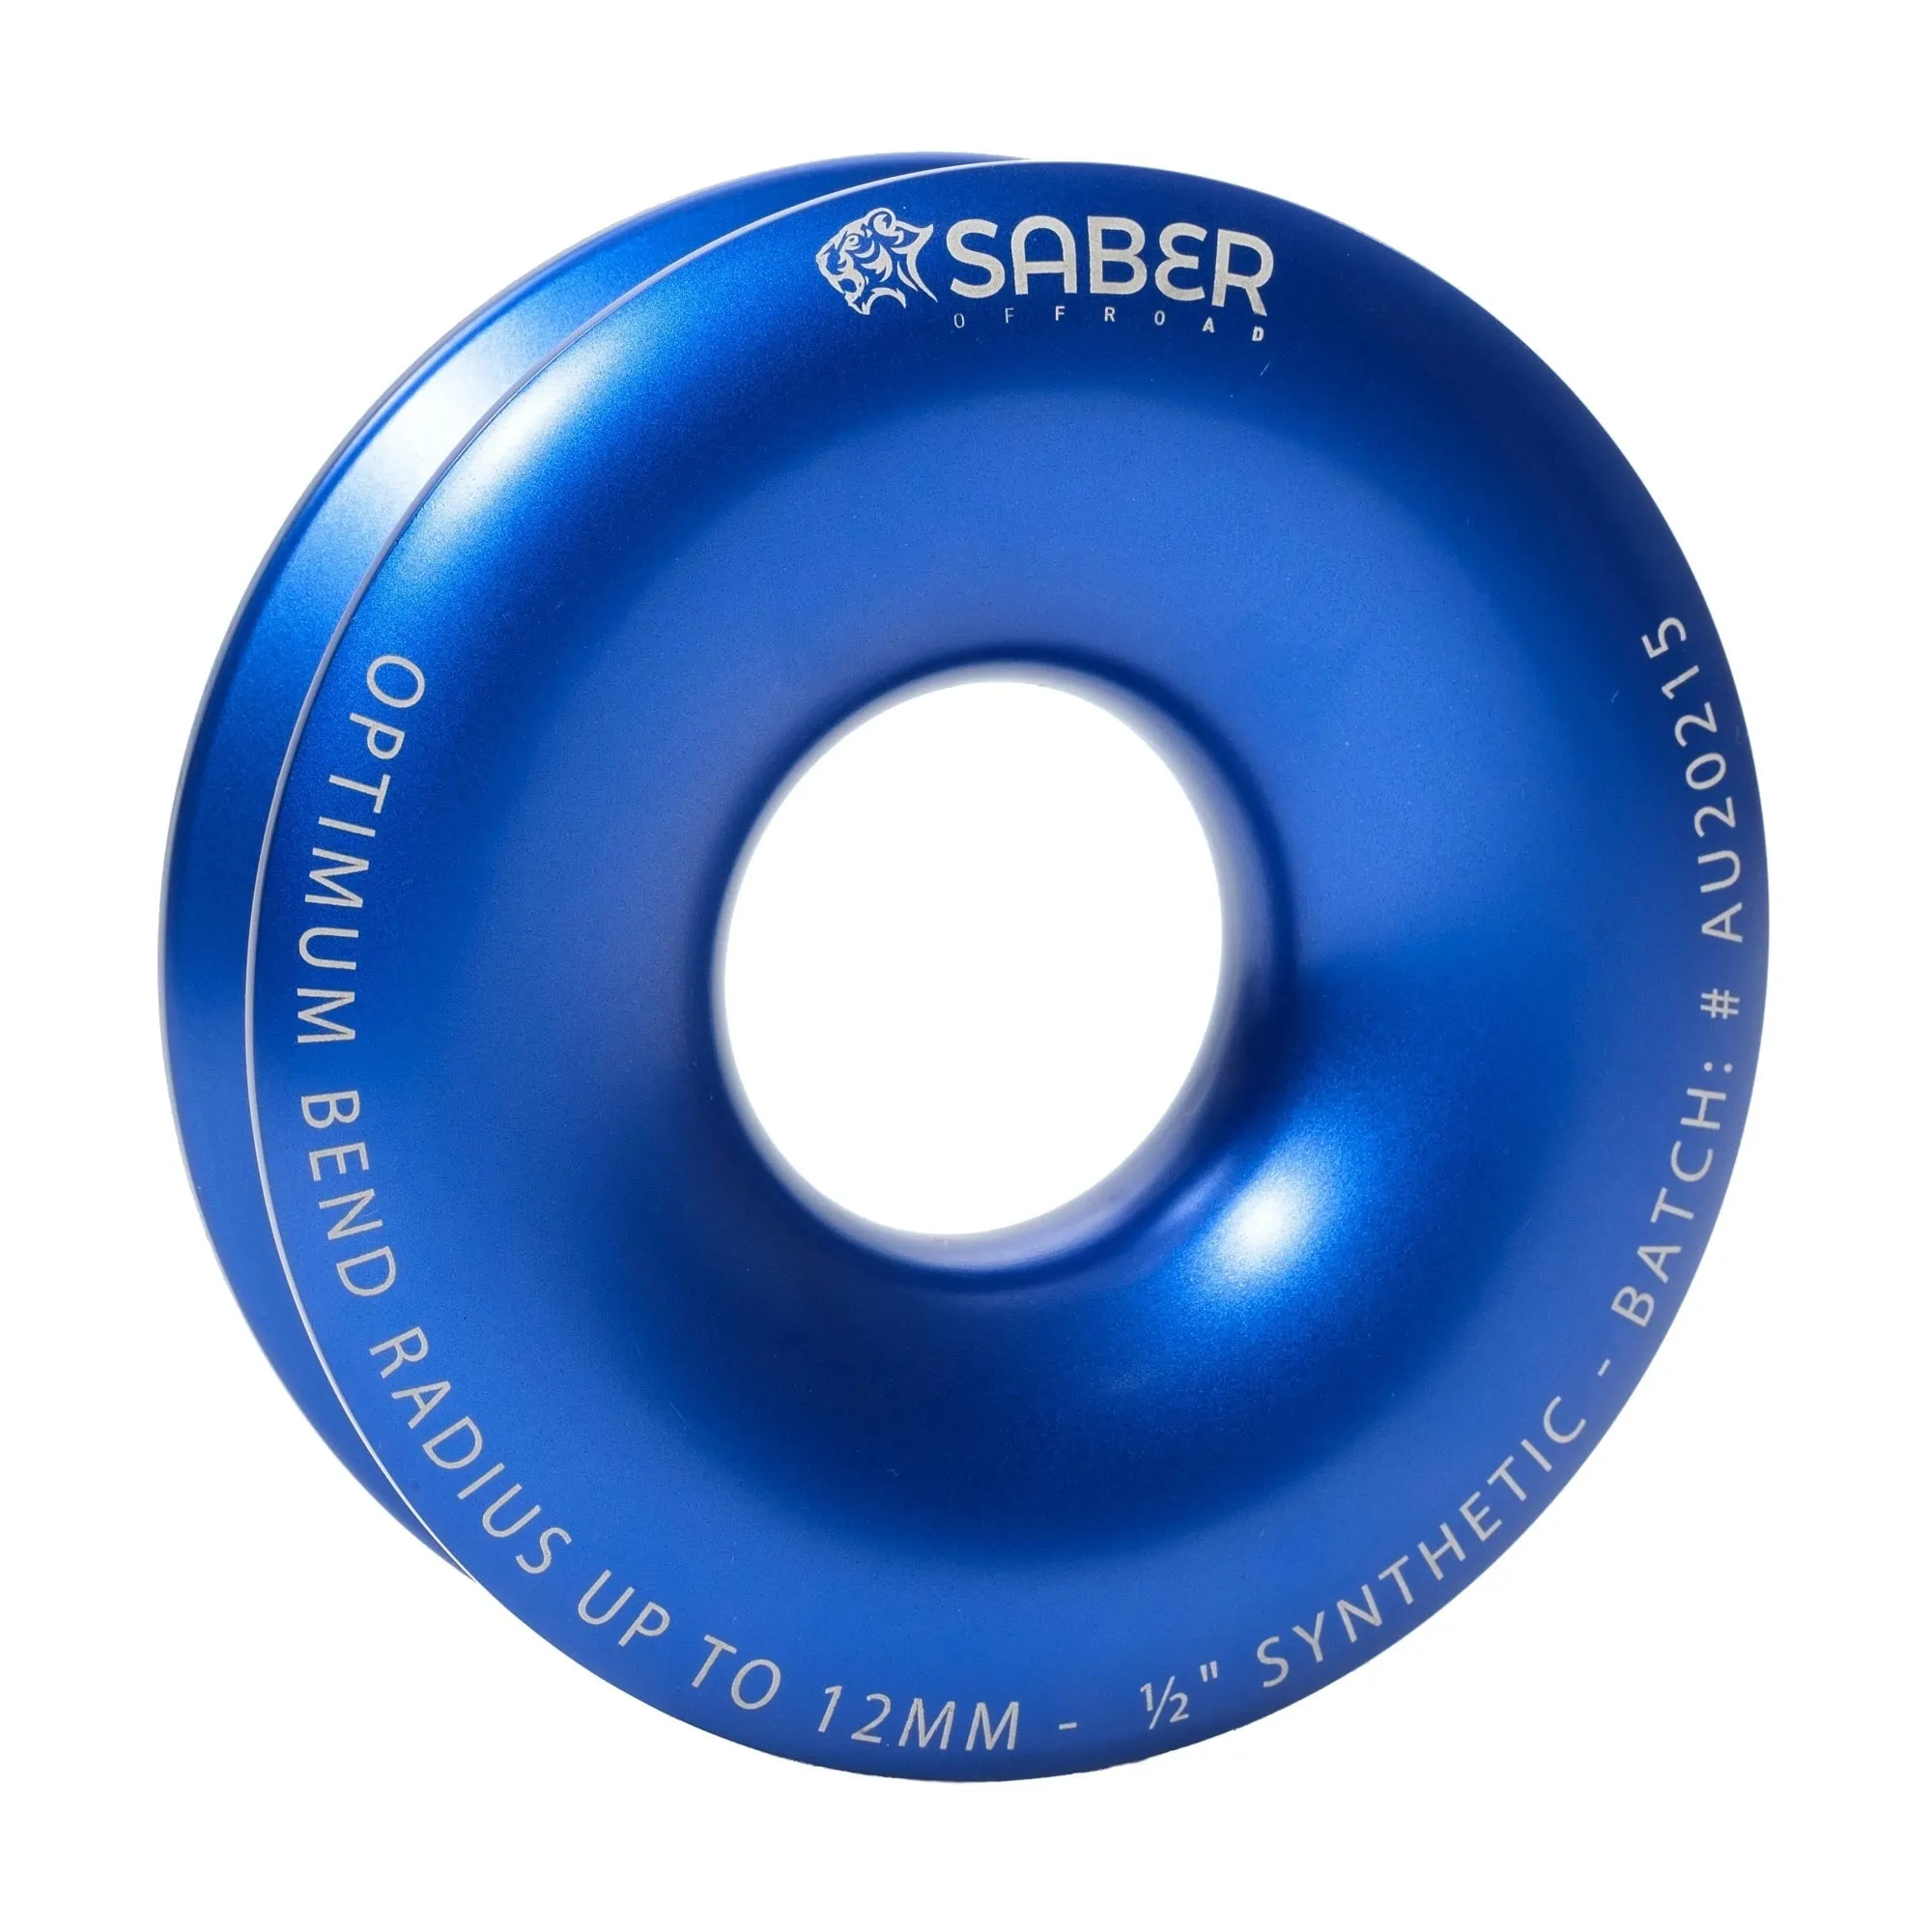 Saber Offroad Recovery Ring MKII HQ 0711